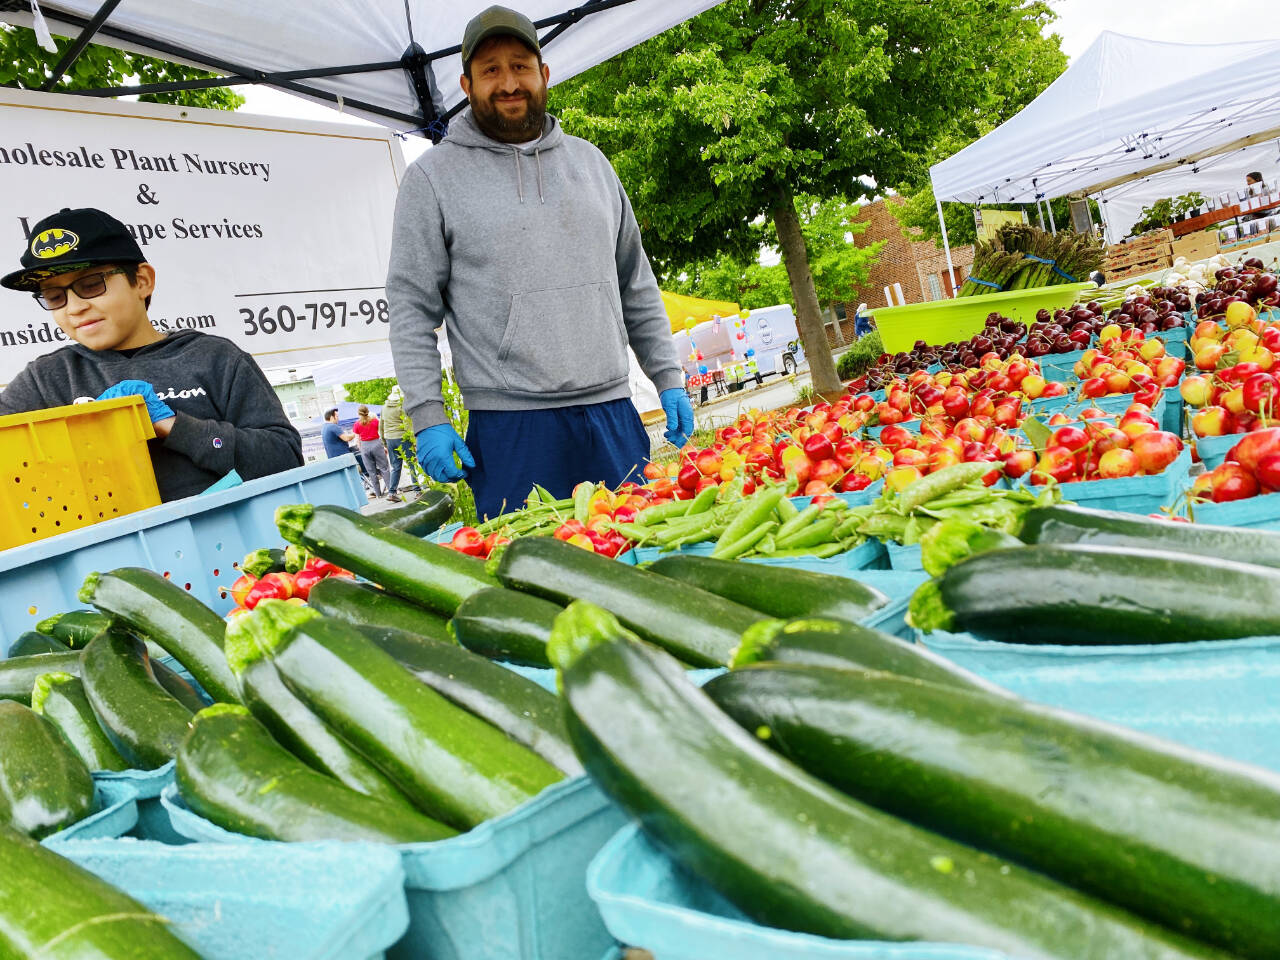 Photo by Emma Jane Garcia/Sequim Farmers & Artisans Market
Check out zucchinis, cherries and more at the Oceanside Nurseries at the Sequim Farmers & Artisans Market, hosting special hours this Saturday and Sunday during Lavender Weekend.